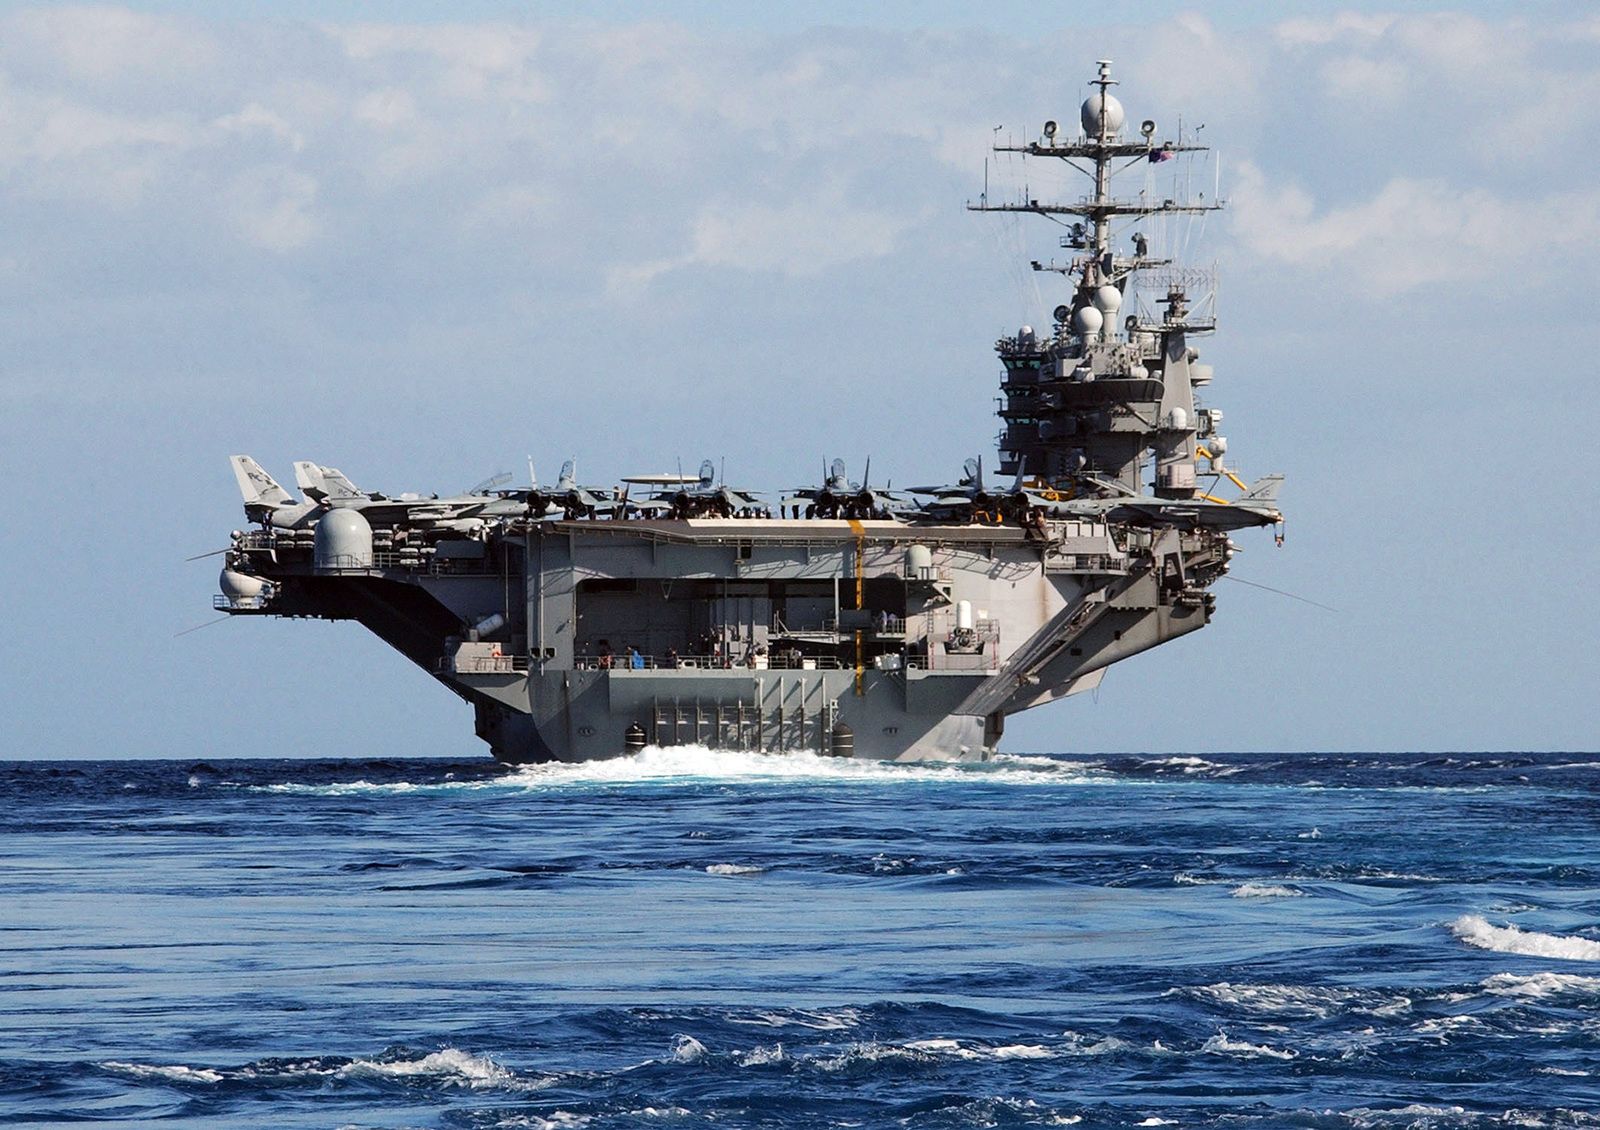 a-stern-view-of-the-us-navy-usn-nimitz-class-aircraft-carrier-uss-harry-s-truman-31ab3d-1600